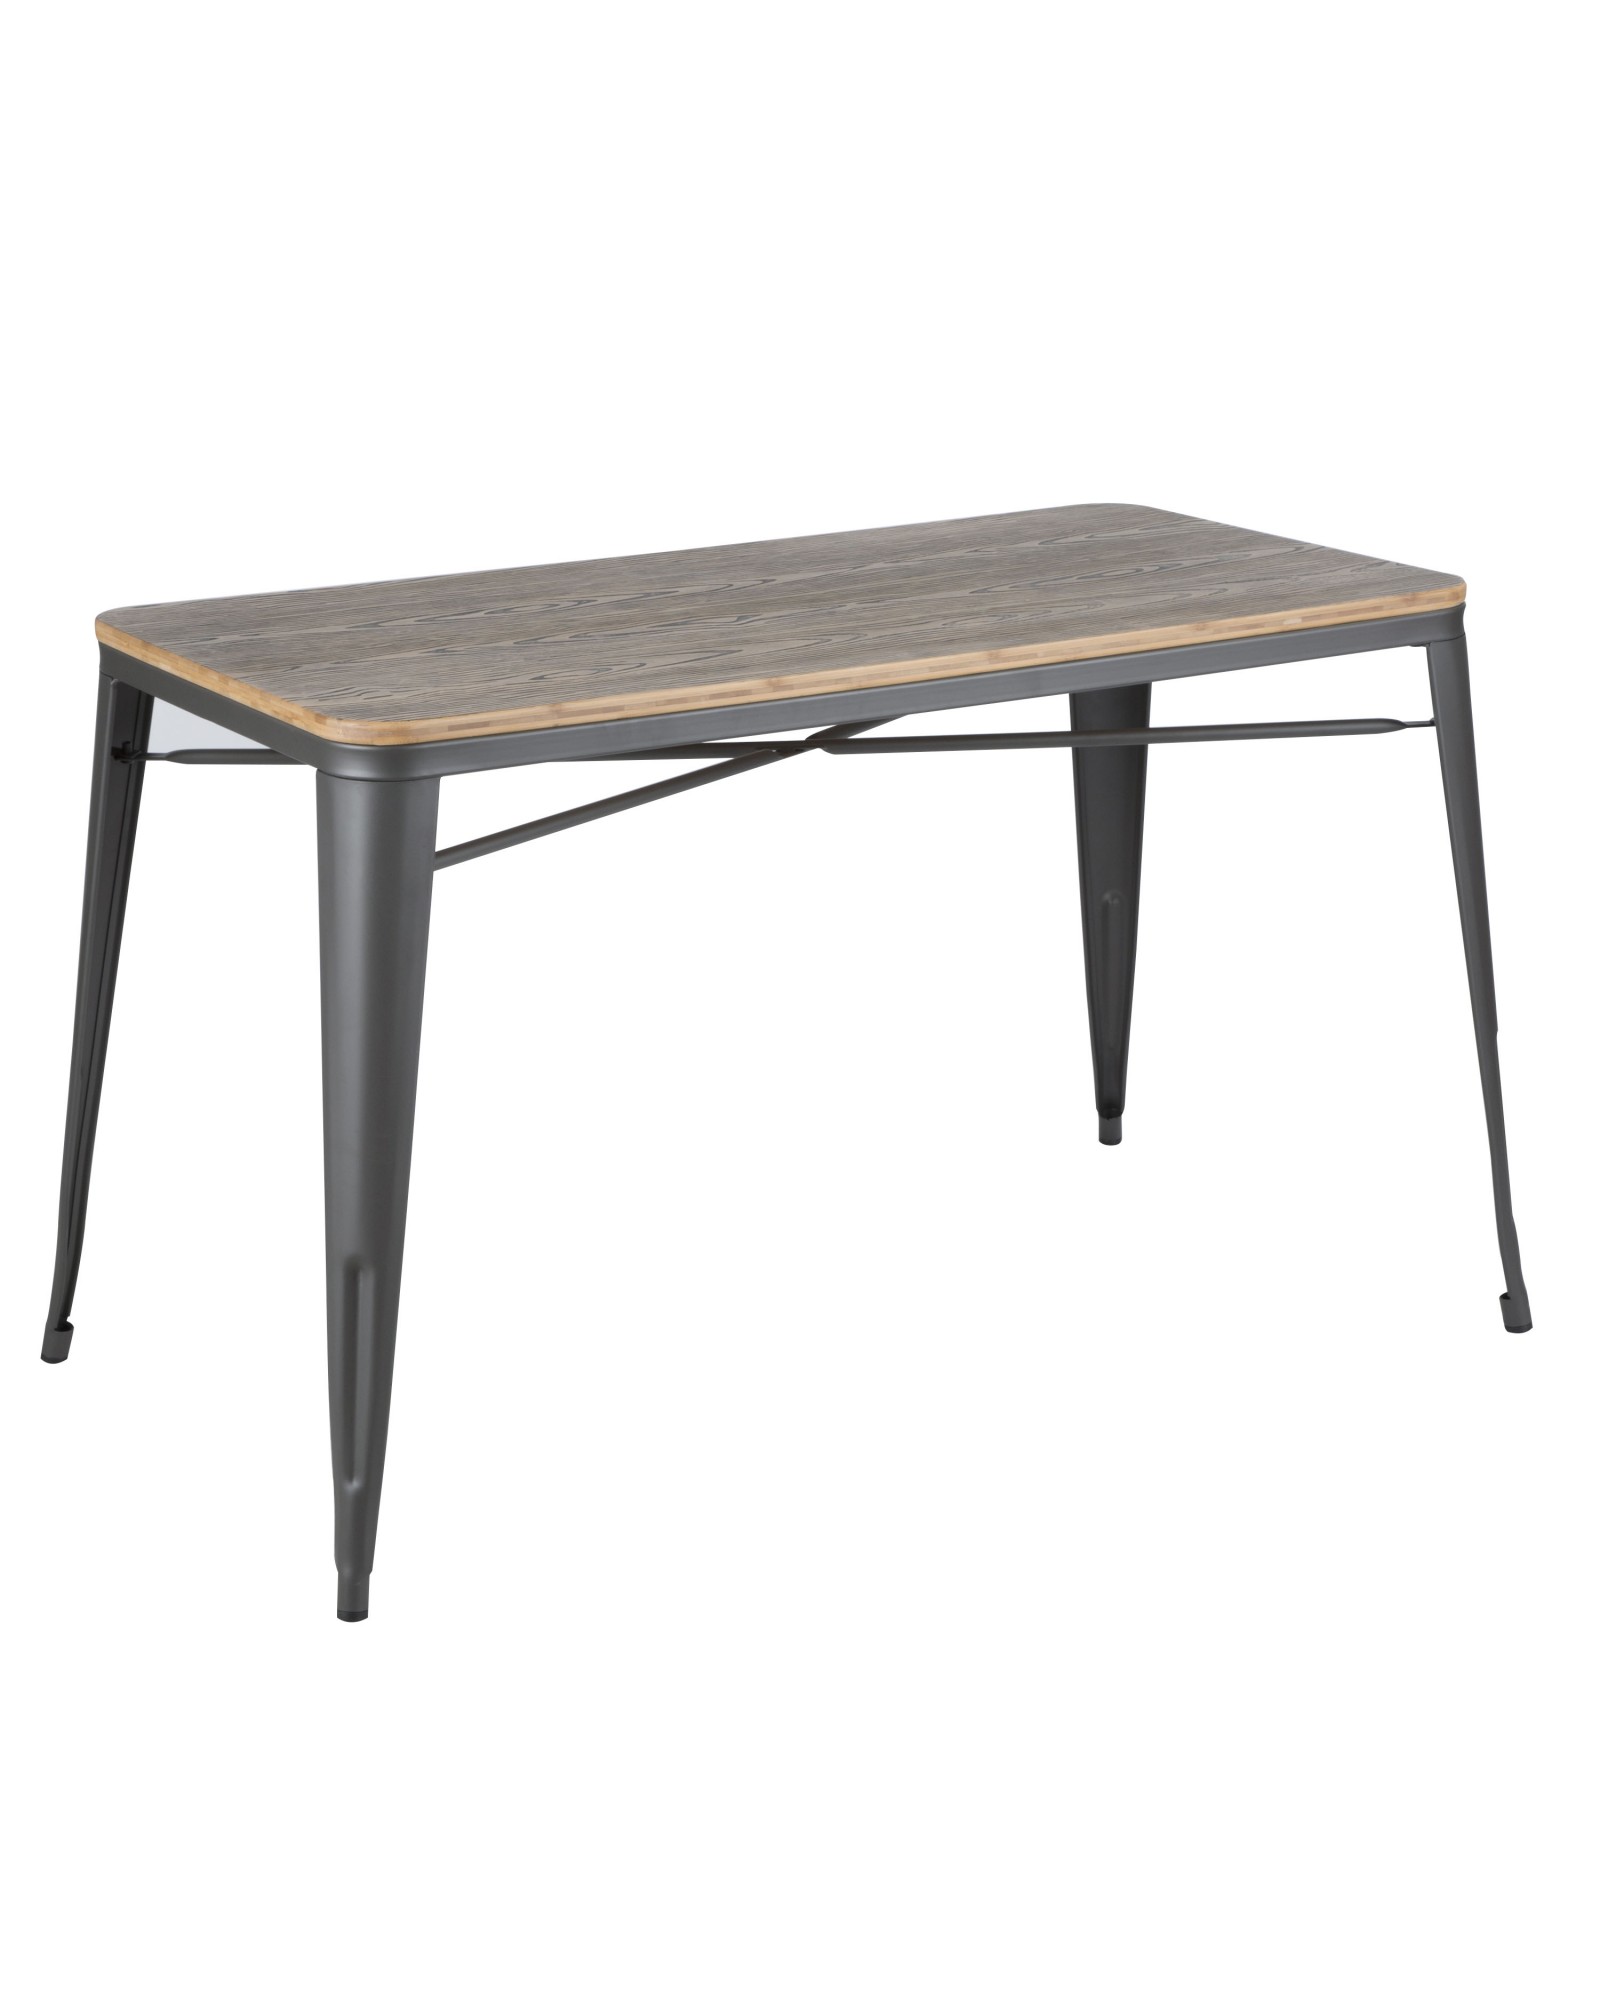 Oregon Industrial-Farmhouse Utility Table in Grey and Brown